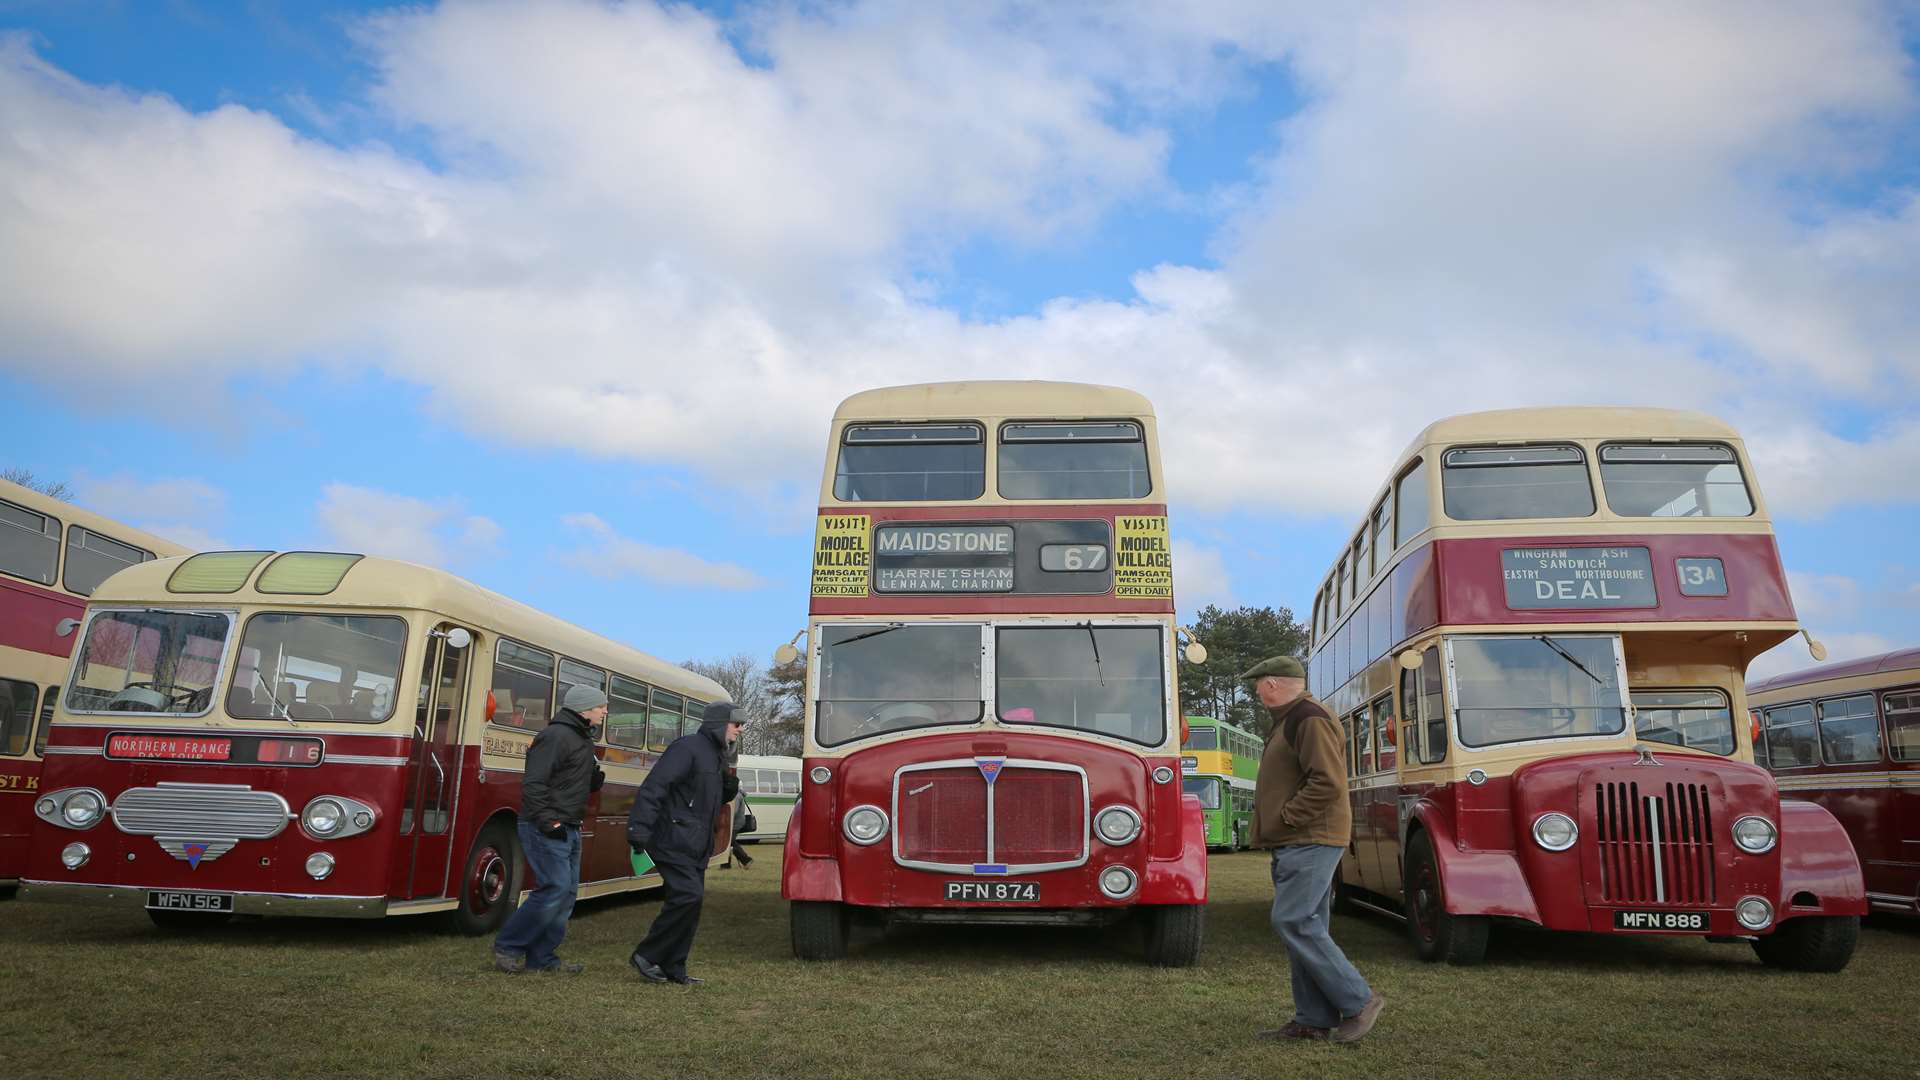 The Heritage Transport Show returns to Detling this weekend